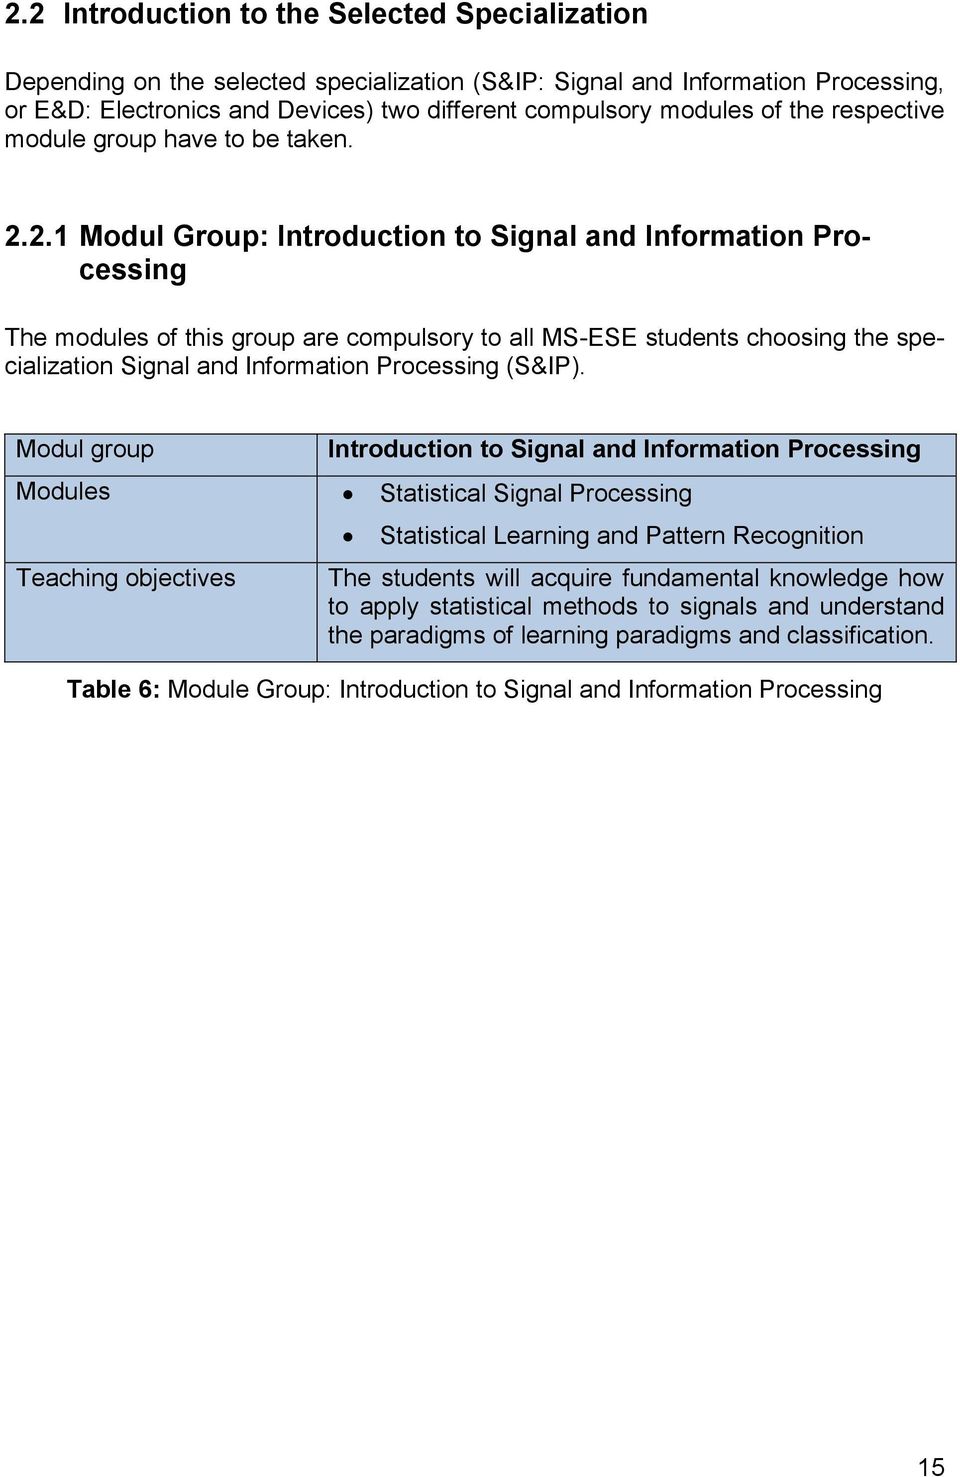 2.1 Modul Group: Introduction to Signal and Information Processing The modules of this group are compulsory to all MS-ESE students choosing the specialization Signal and Information Processing (S&IP).